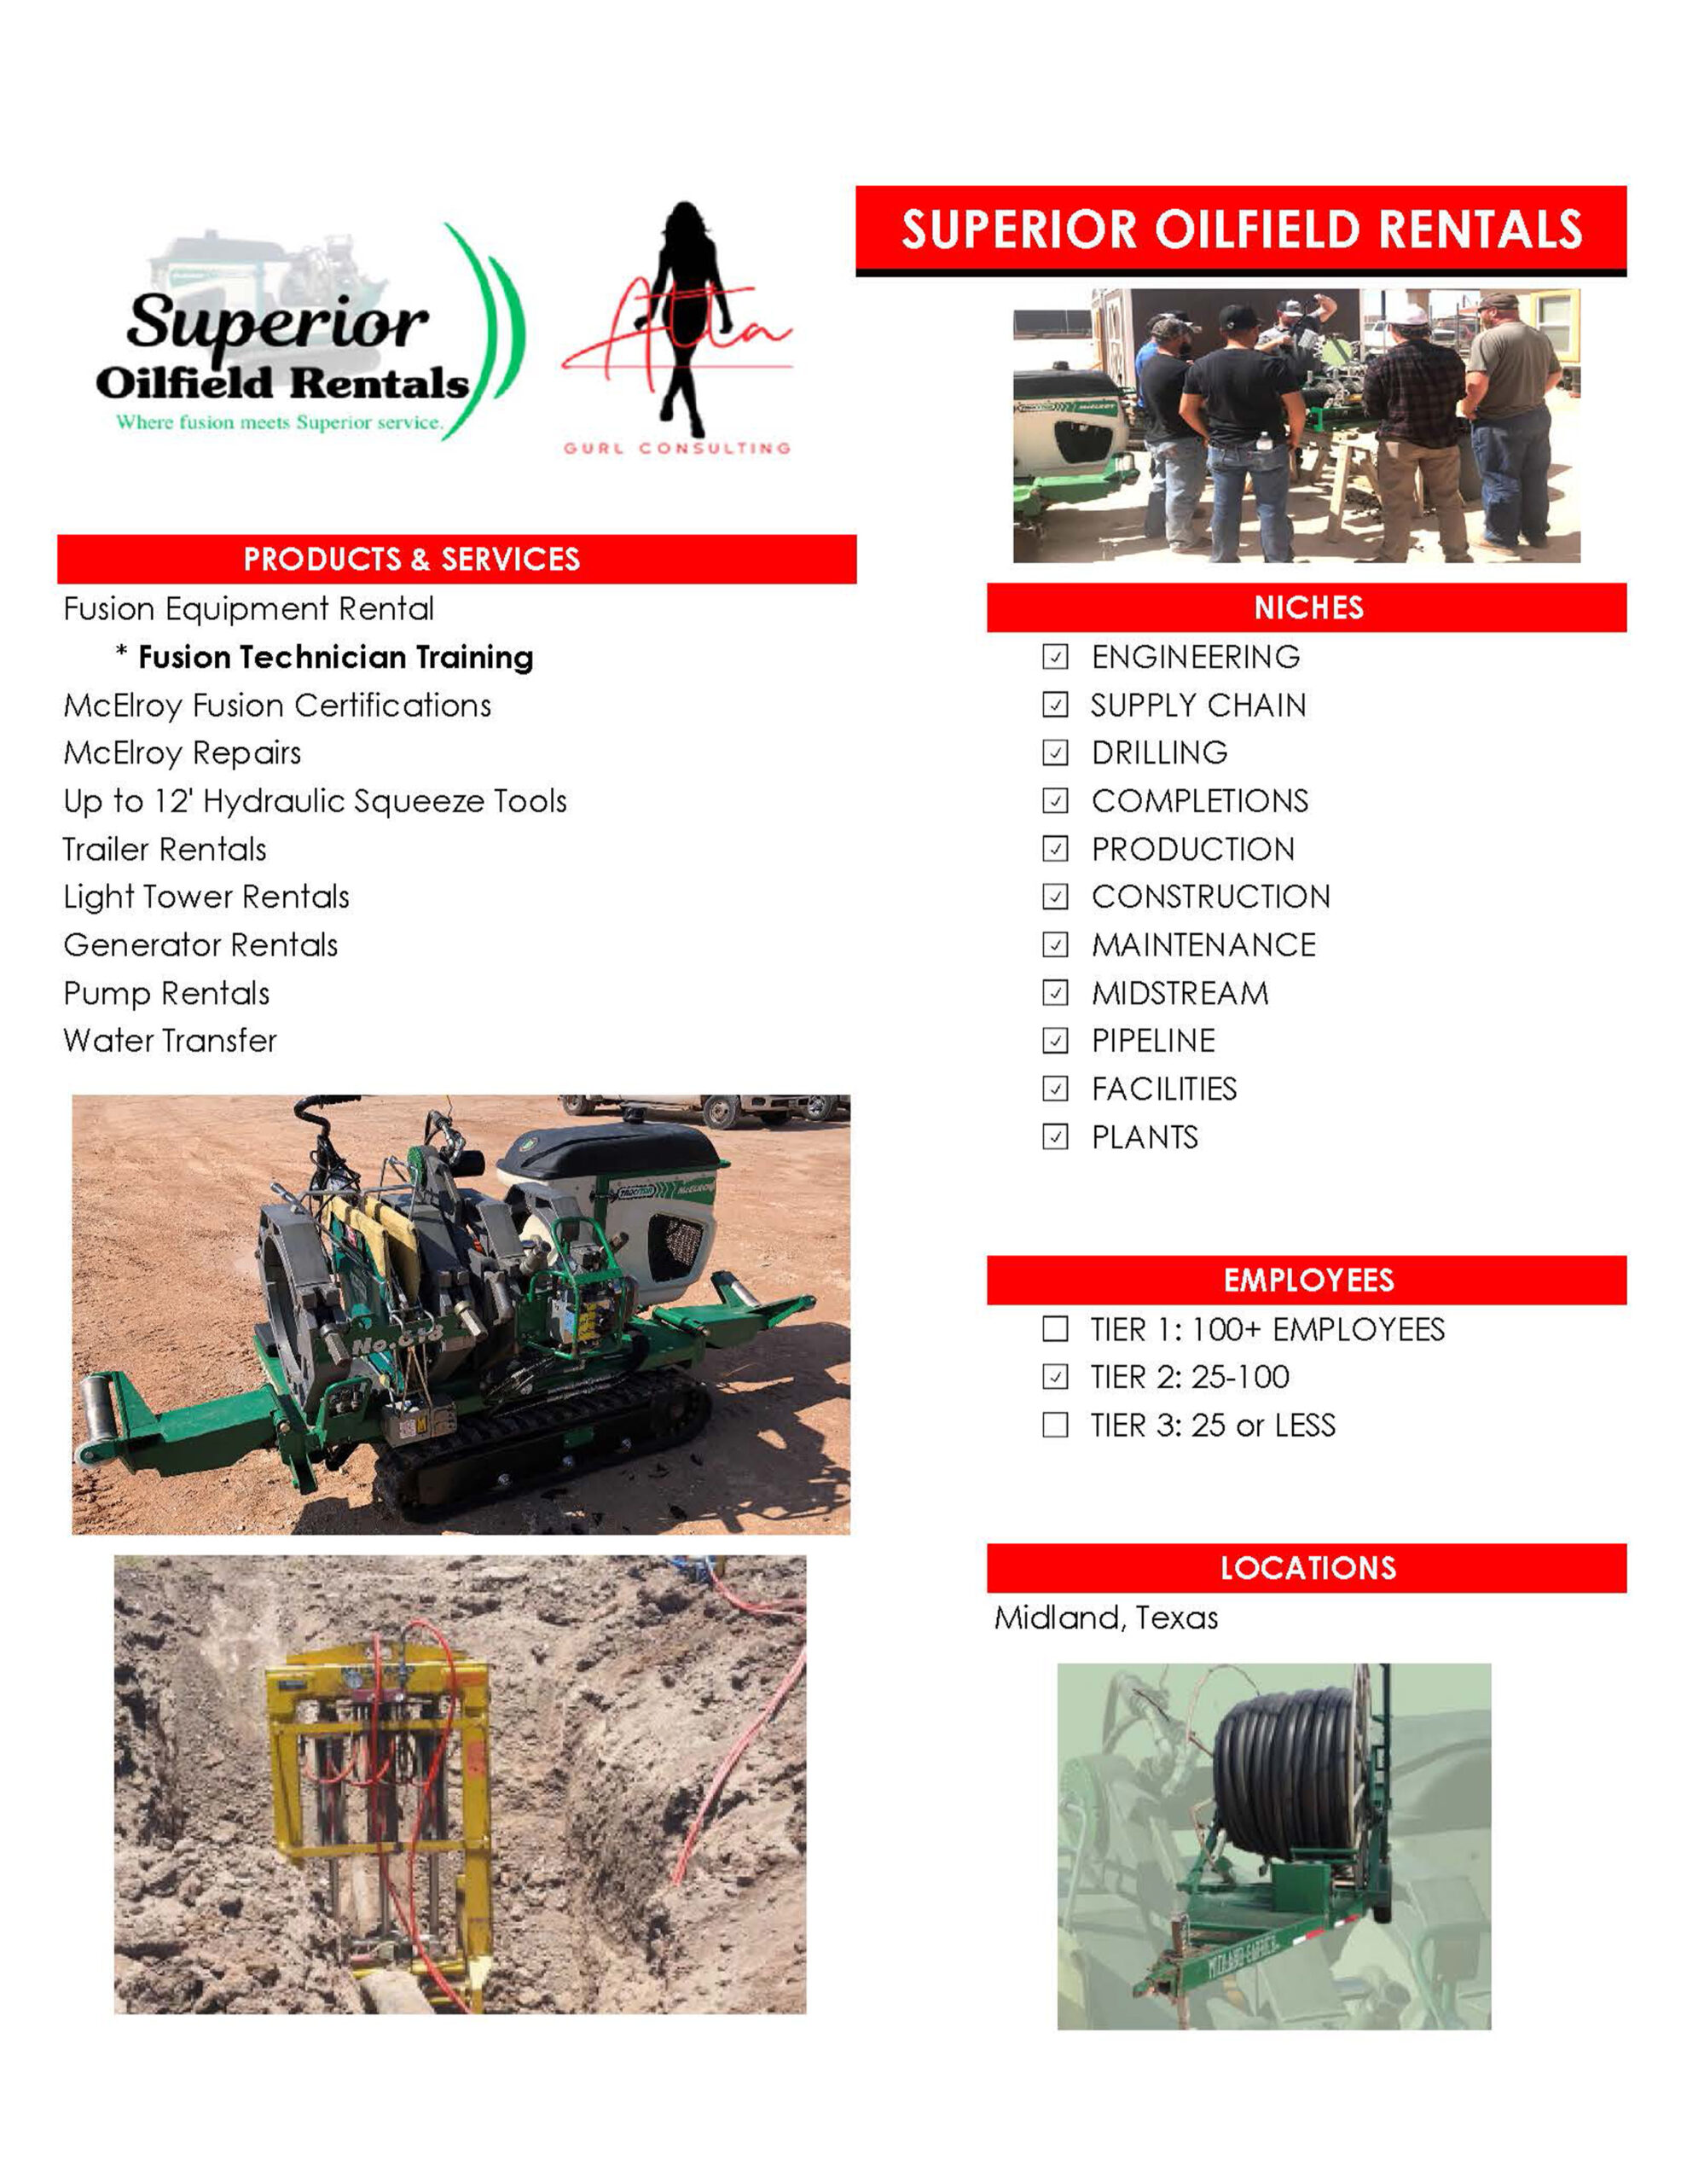 PRODUCTS & SERVICES Fusion Equipment Rental * Fusion Technician Training McElroy Fusion Certifications McElroy Repairs Up to 12' Hydraulic Squeeze Tools Trailer Rentals Light Tower Rentals Generator Rentals Pump Rentals Water Transfer